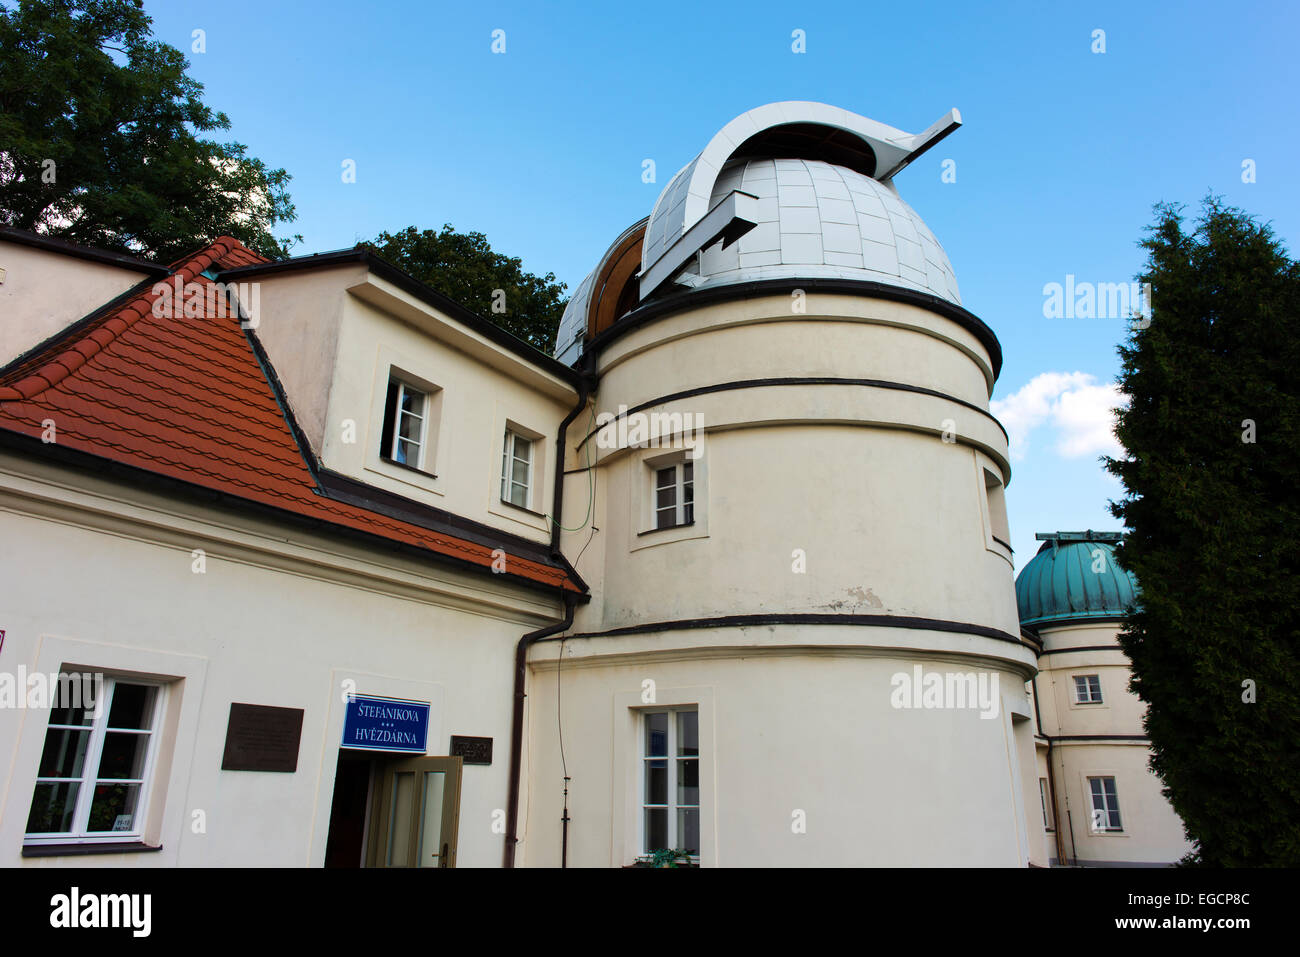 The Stefanik Observatory in Petrin Park was opened in 1928 and fully restored in the mid 1970s. Stock Photo